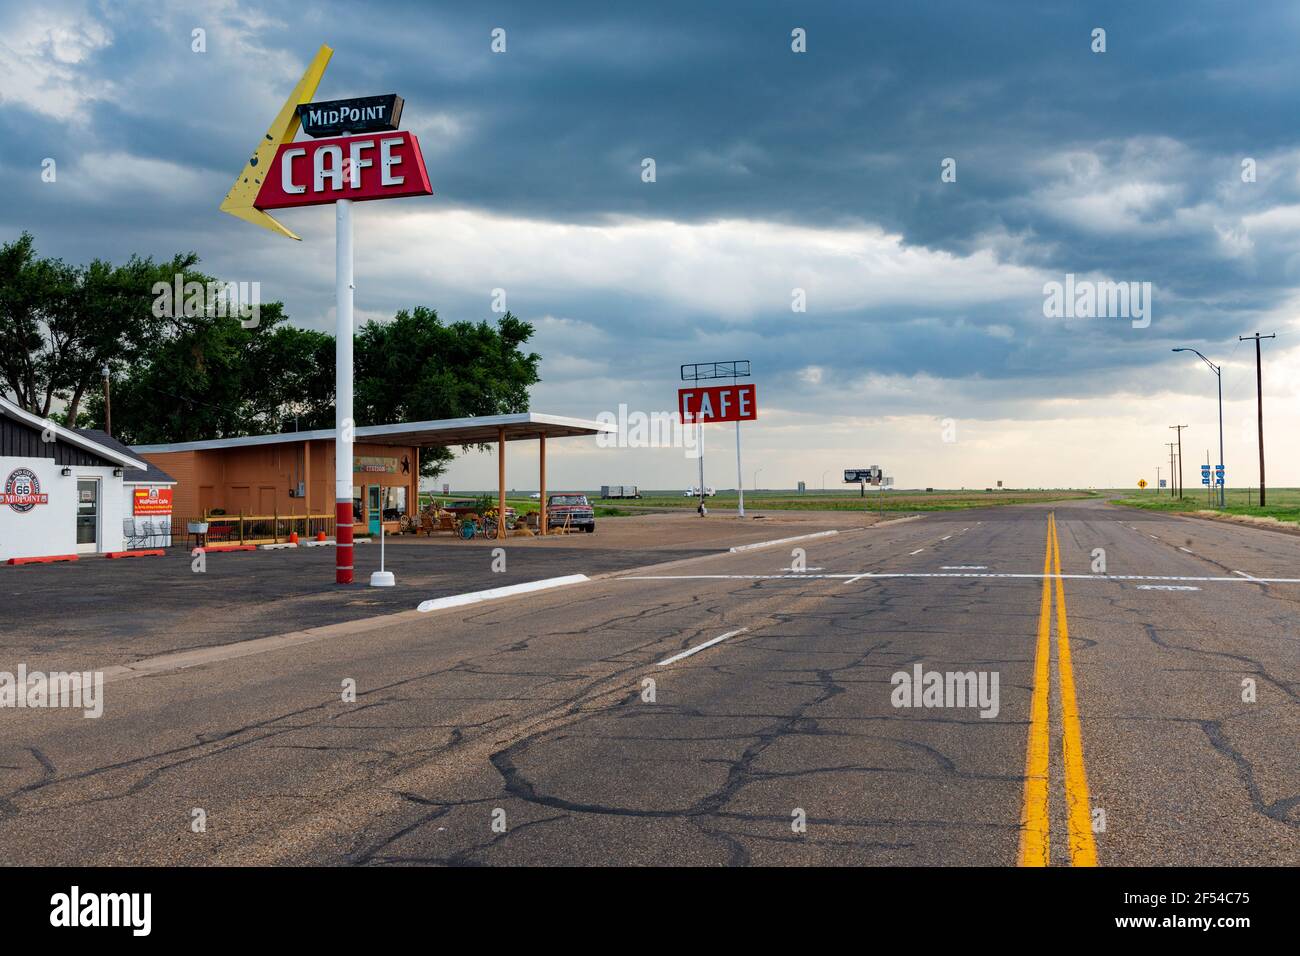 Adrian, Texas - July 9, 2014: View of the Midpoint Cafe along the historic us route 66 in in the city of Adrian, Texas. Stock Photo